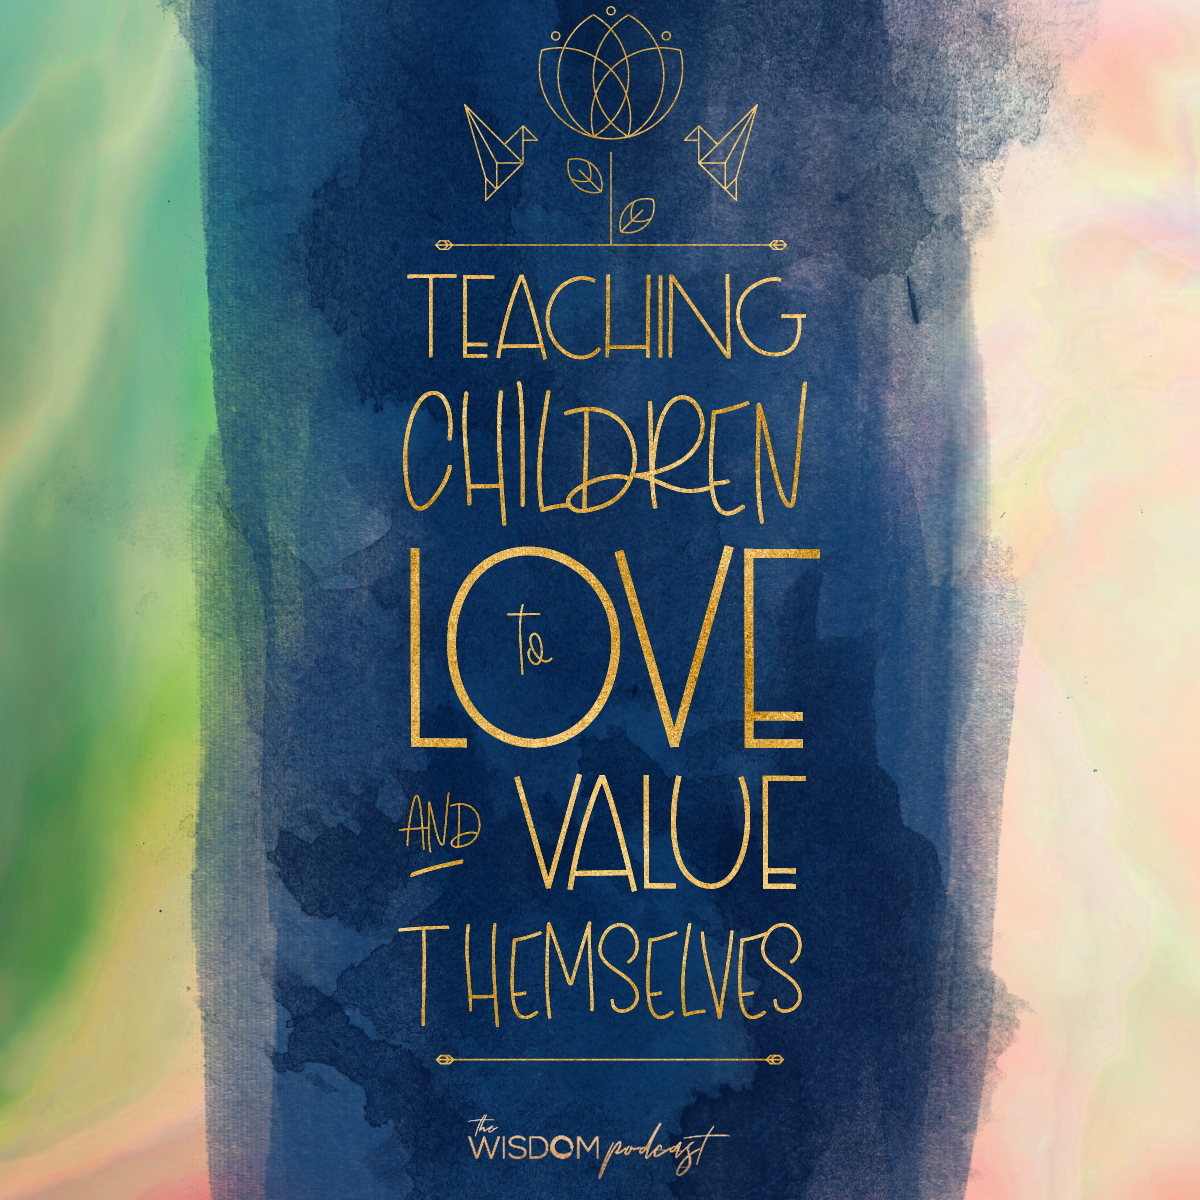 teaching children to love and value themselves - the wisdom podcast season 1 episode 9